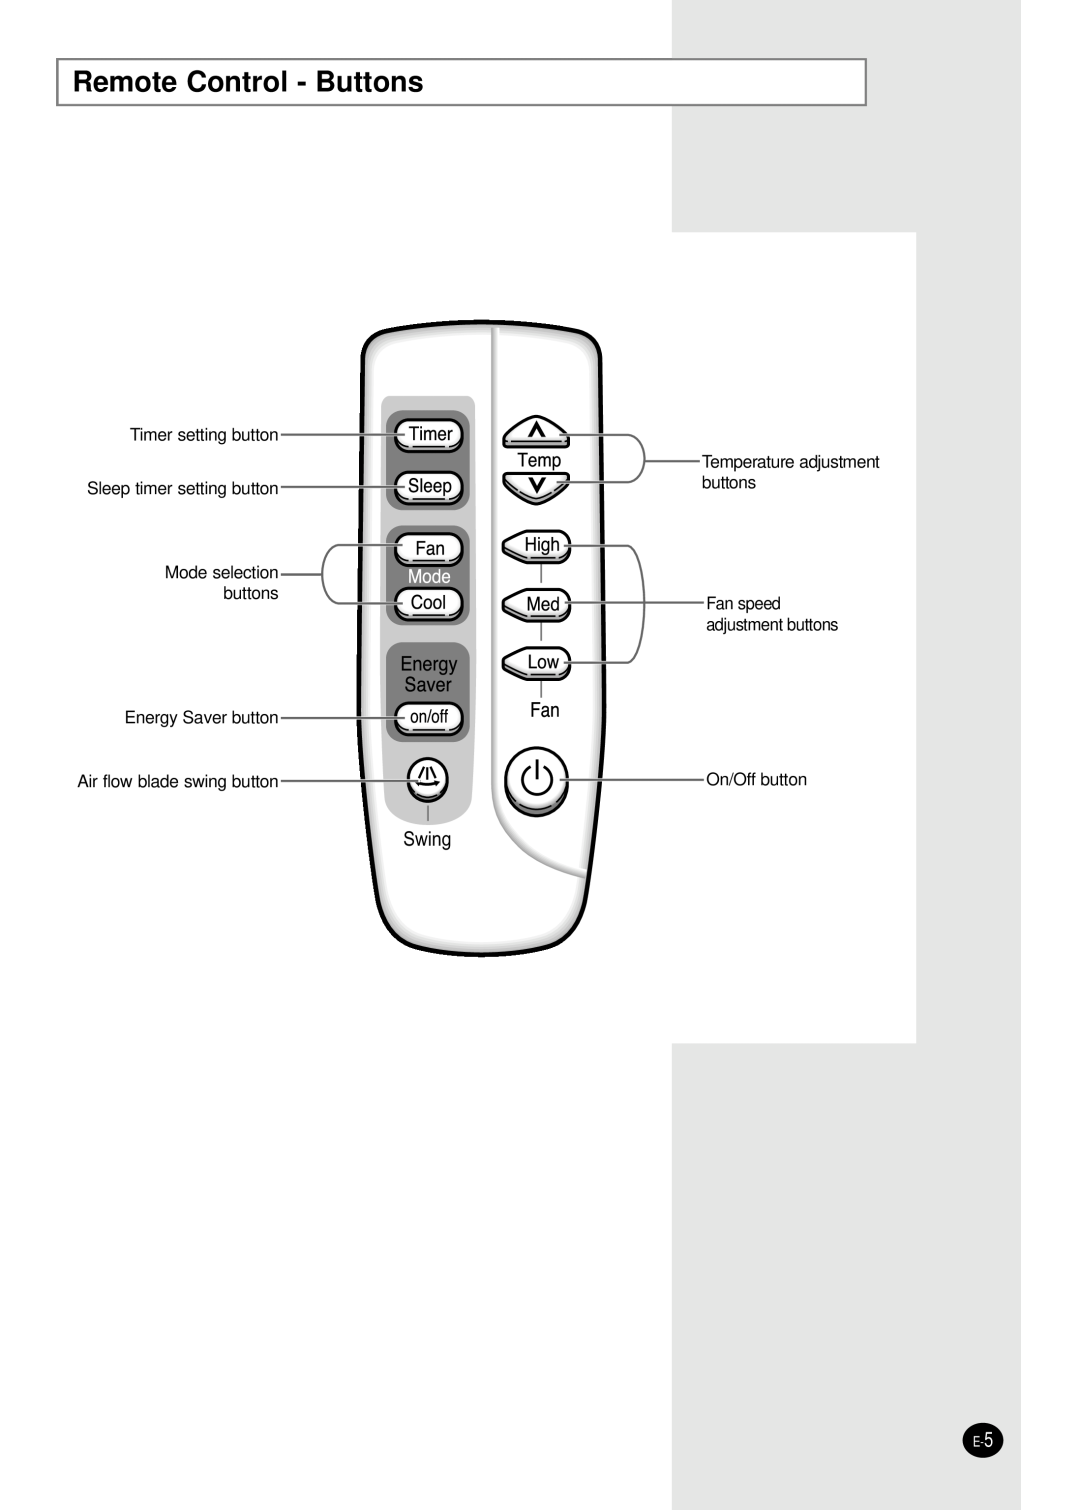 Samsung AW2400B manual Remote Control - Buttons, Swing 